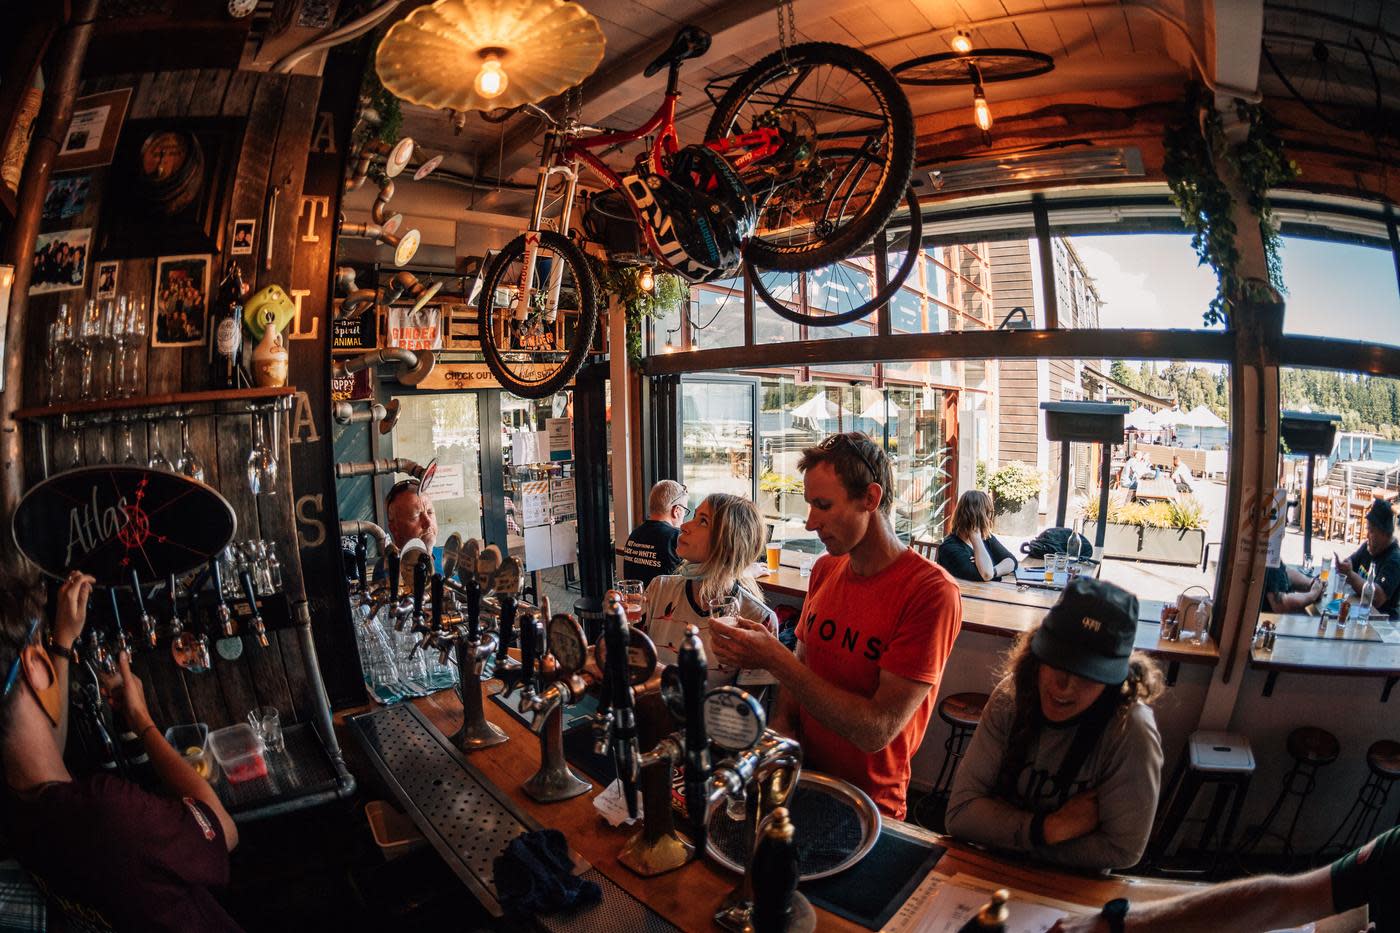 Mountain bikers ordering a drink at Atlas Beer Cafè